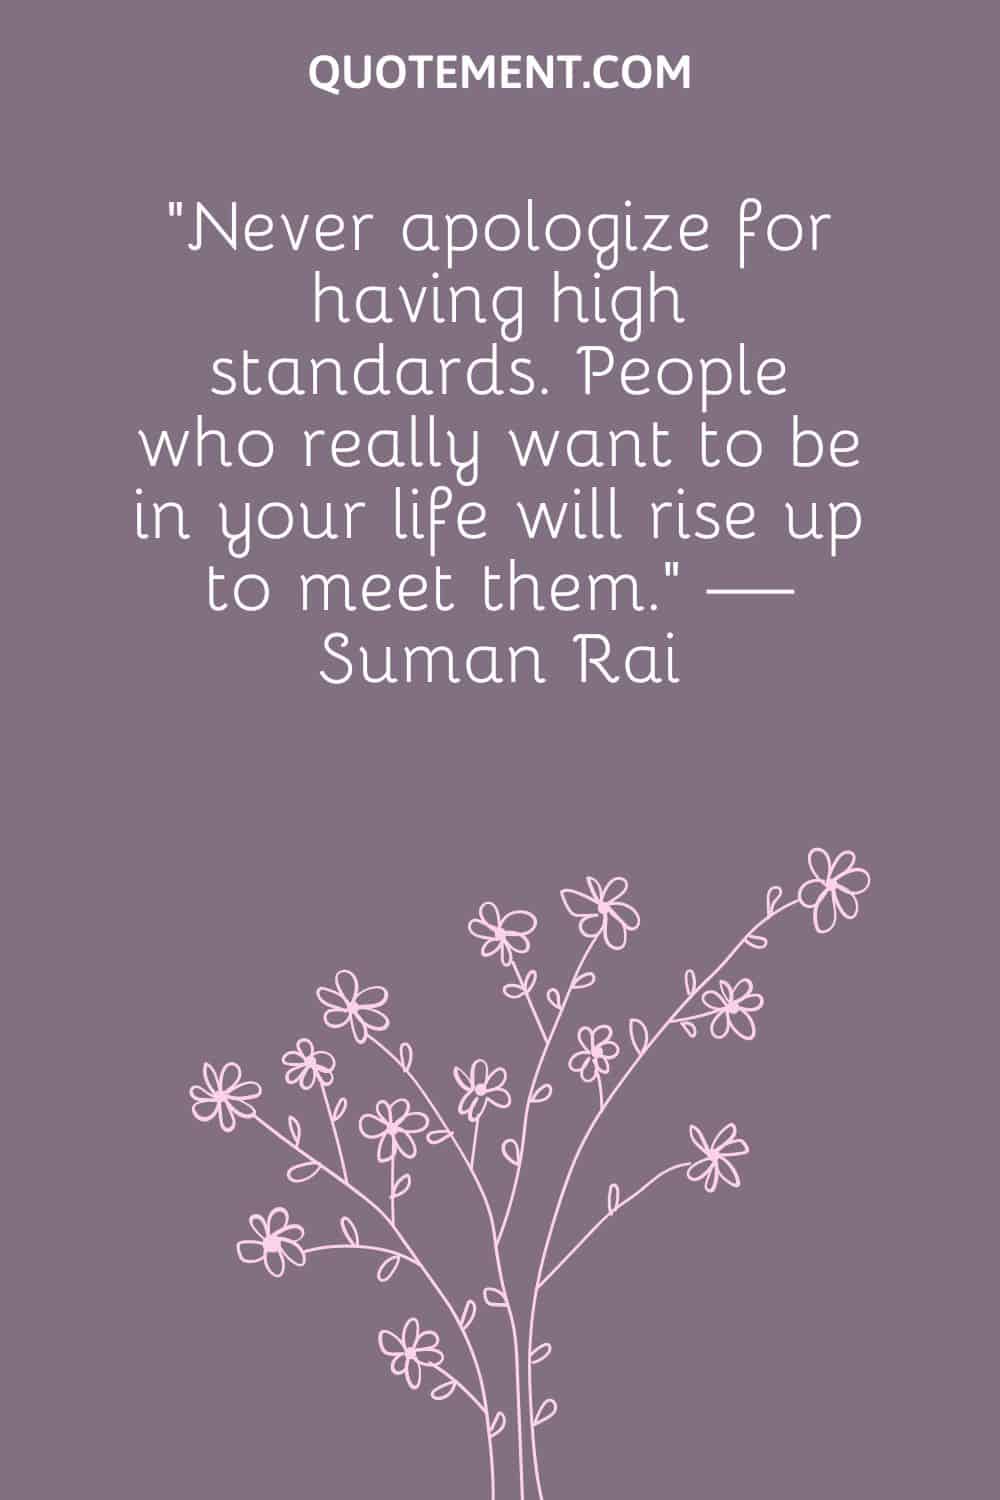 “Never apologize for having high standards. People who really want to be in your life will rise up to meet them.” — Suman Rai